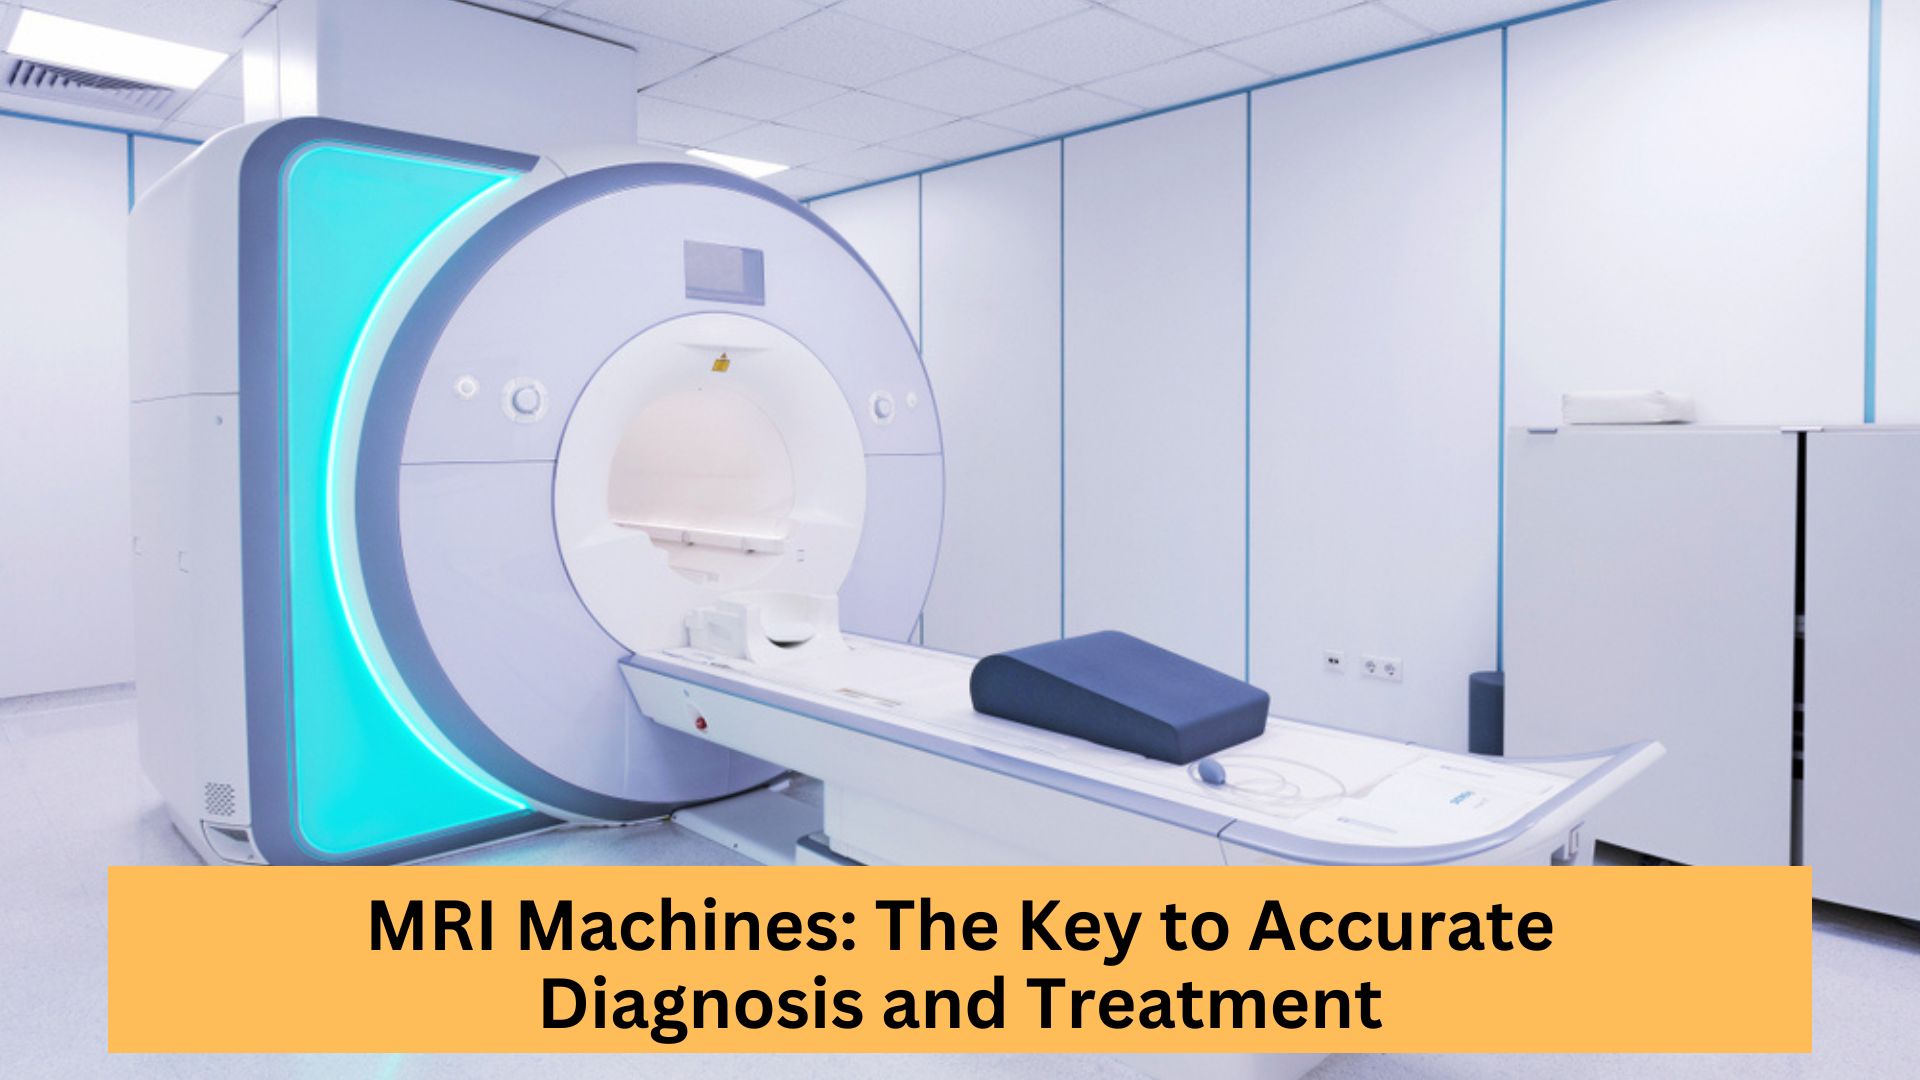 MRI Machines: The Key to Accurate Diagnosis and Treatment